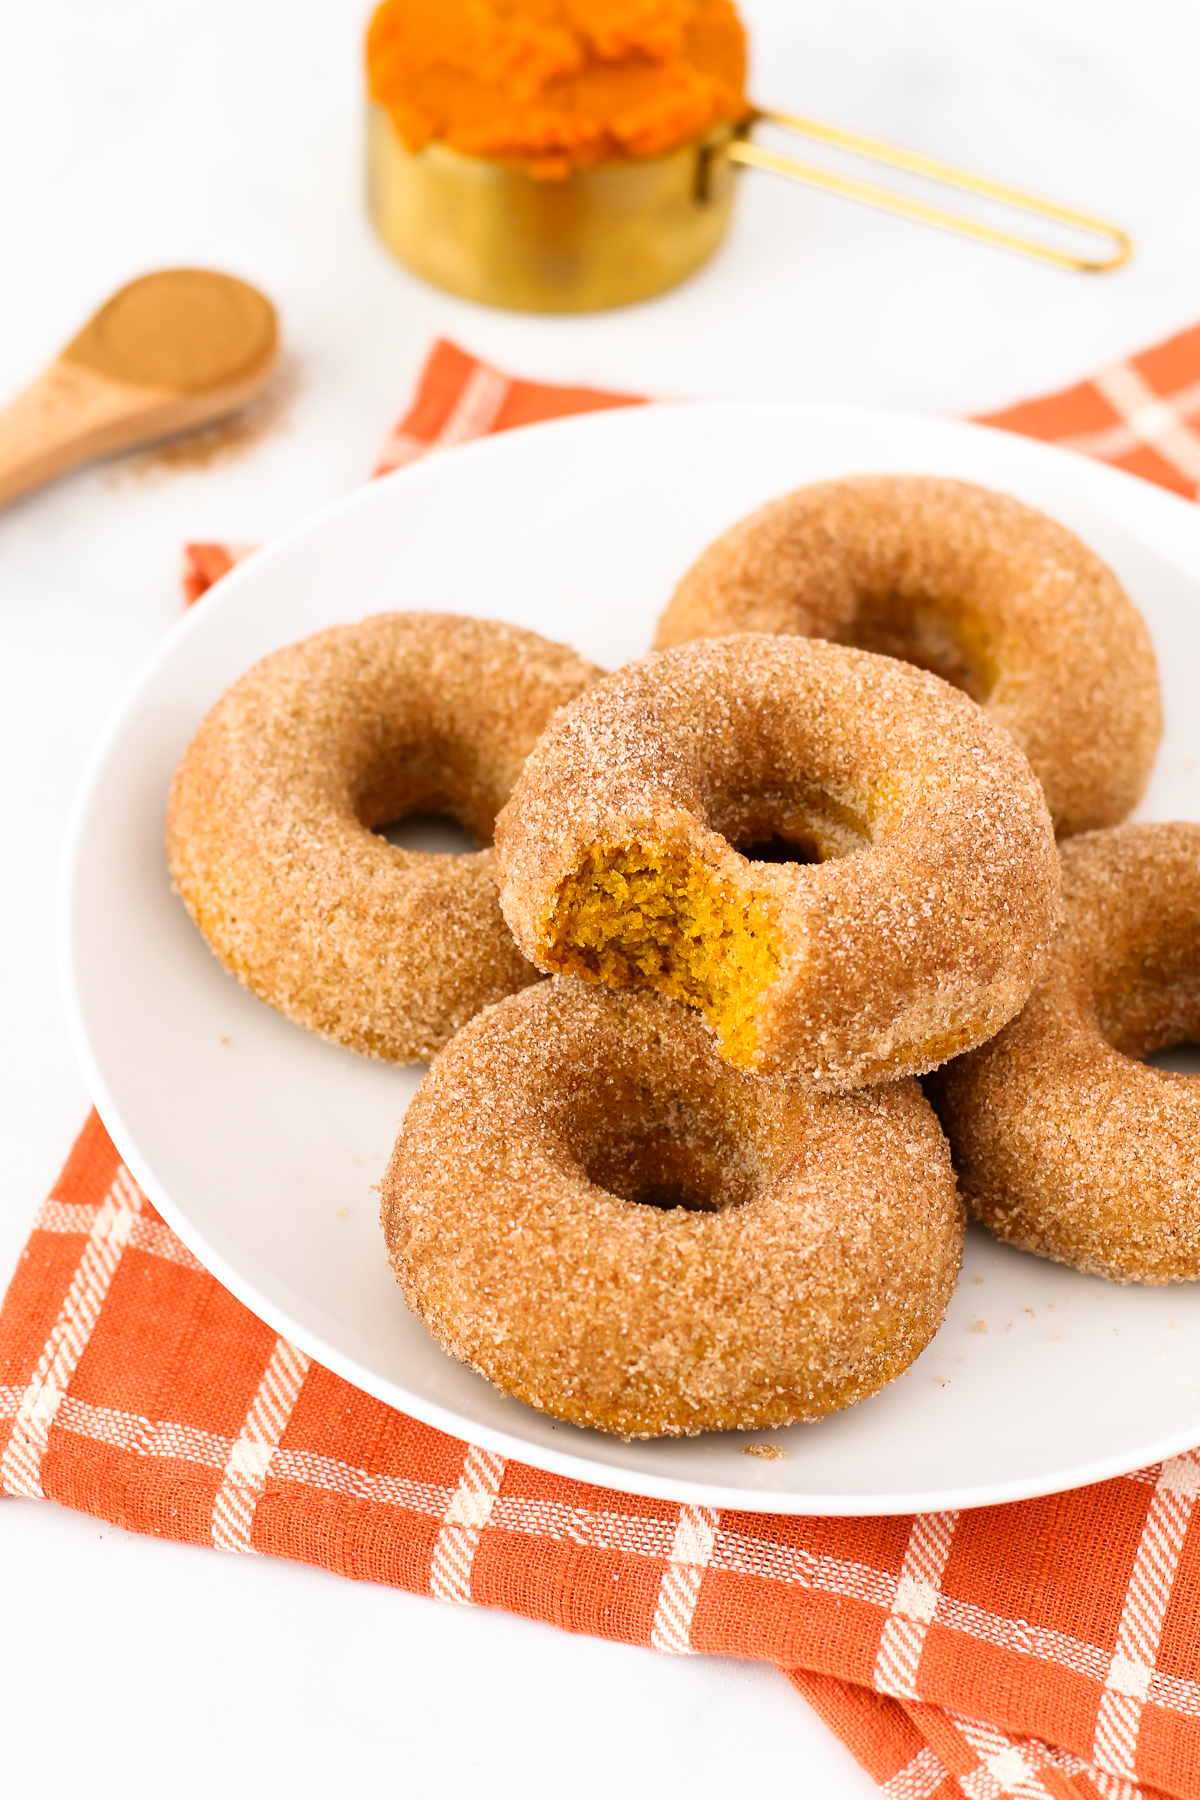 Gluten Free Vegan Cinnamon Sugar Pumpkin Donuts. Fluffy baked pumpkin donuts, coated in cinnamon sugar. These are what donut dreams are made of!